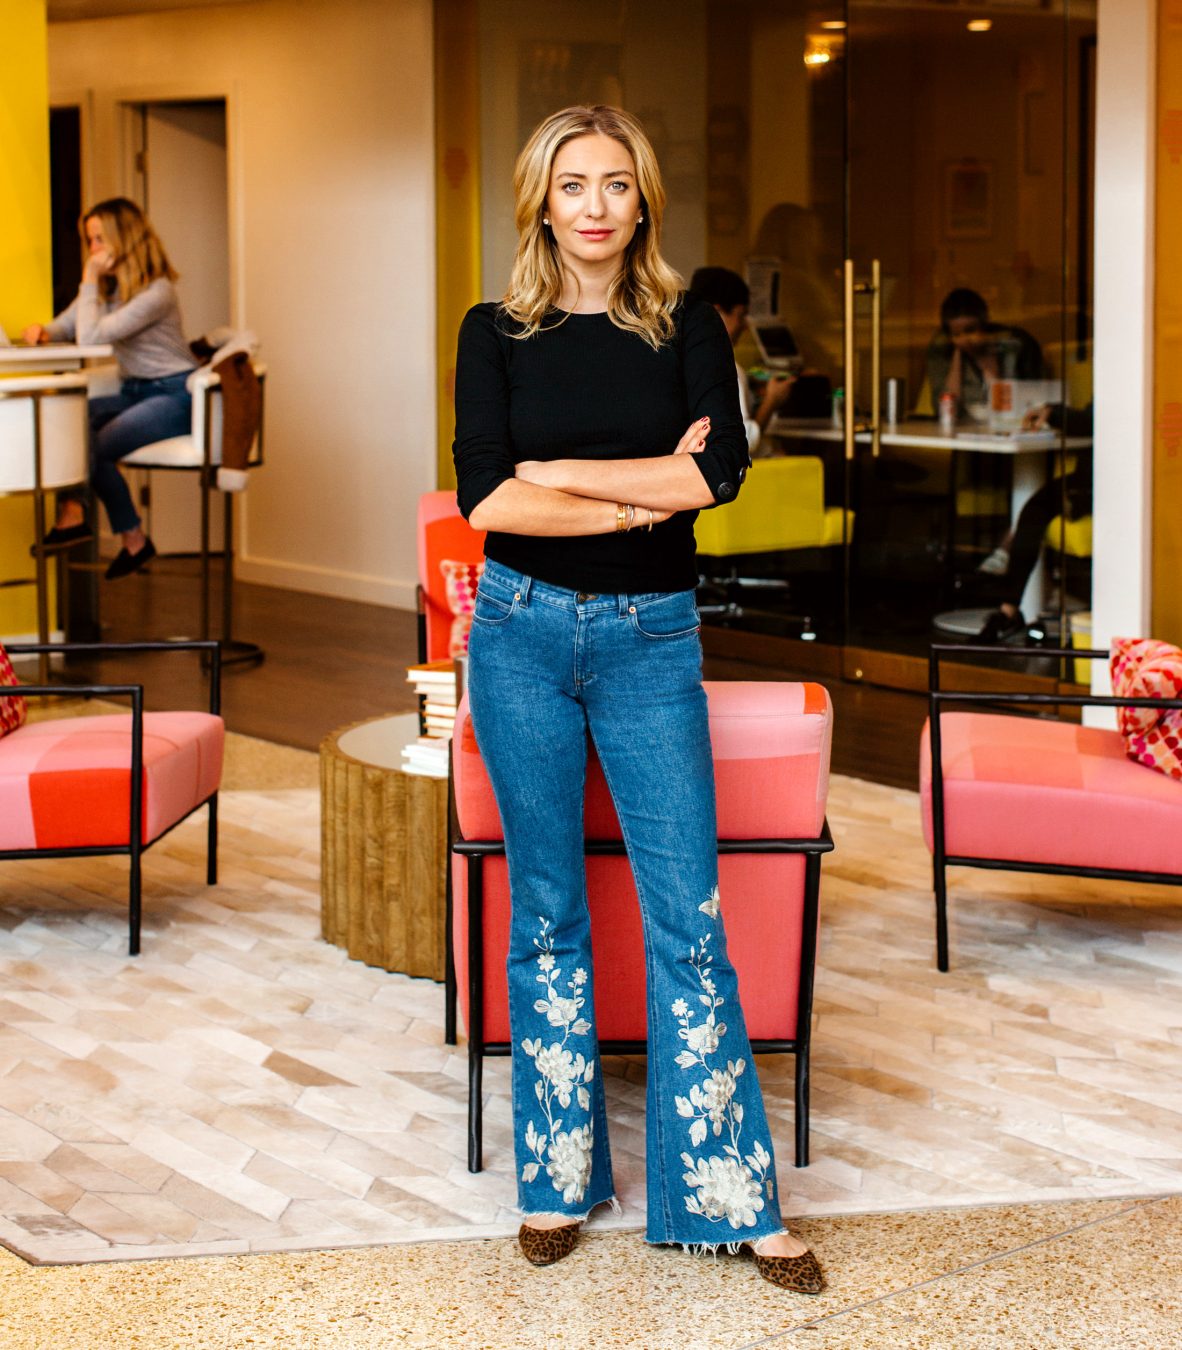 Whitney Wolfe Herd House Whitney Wolfe Herd Sued Tinder Founded Bumble And Now At 30 Is The